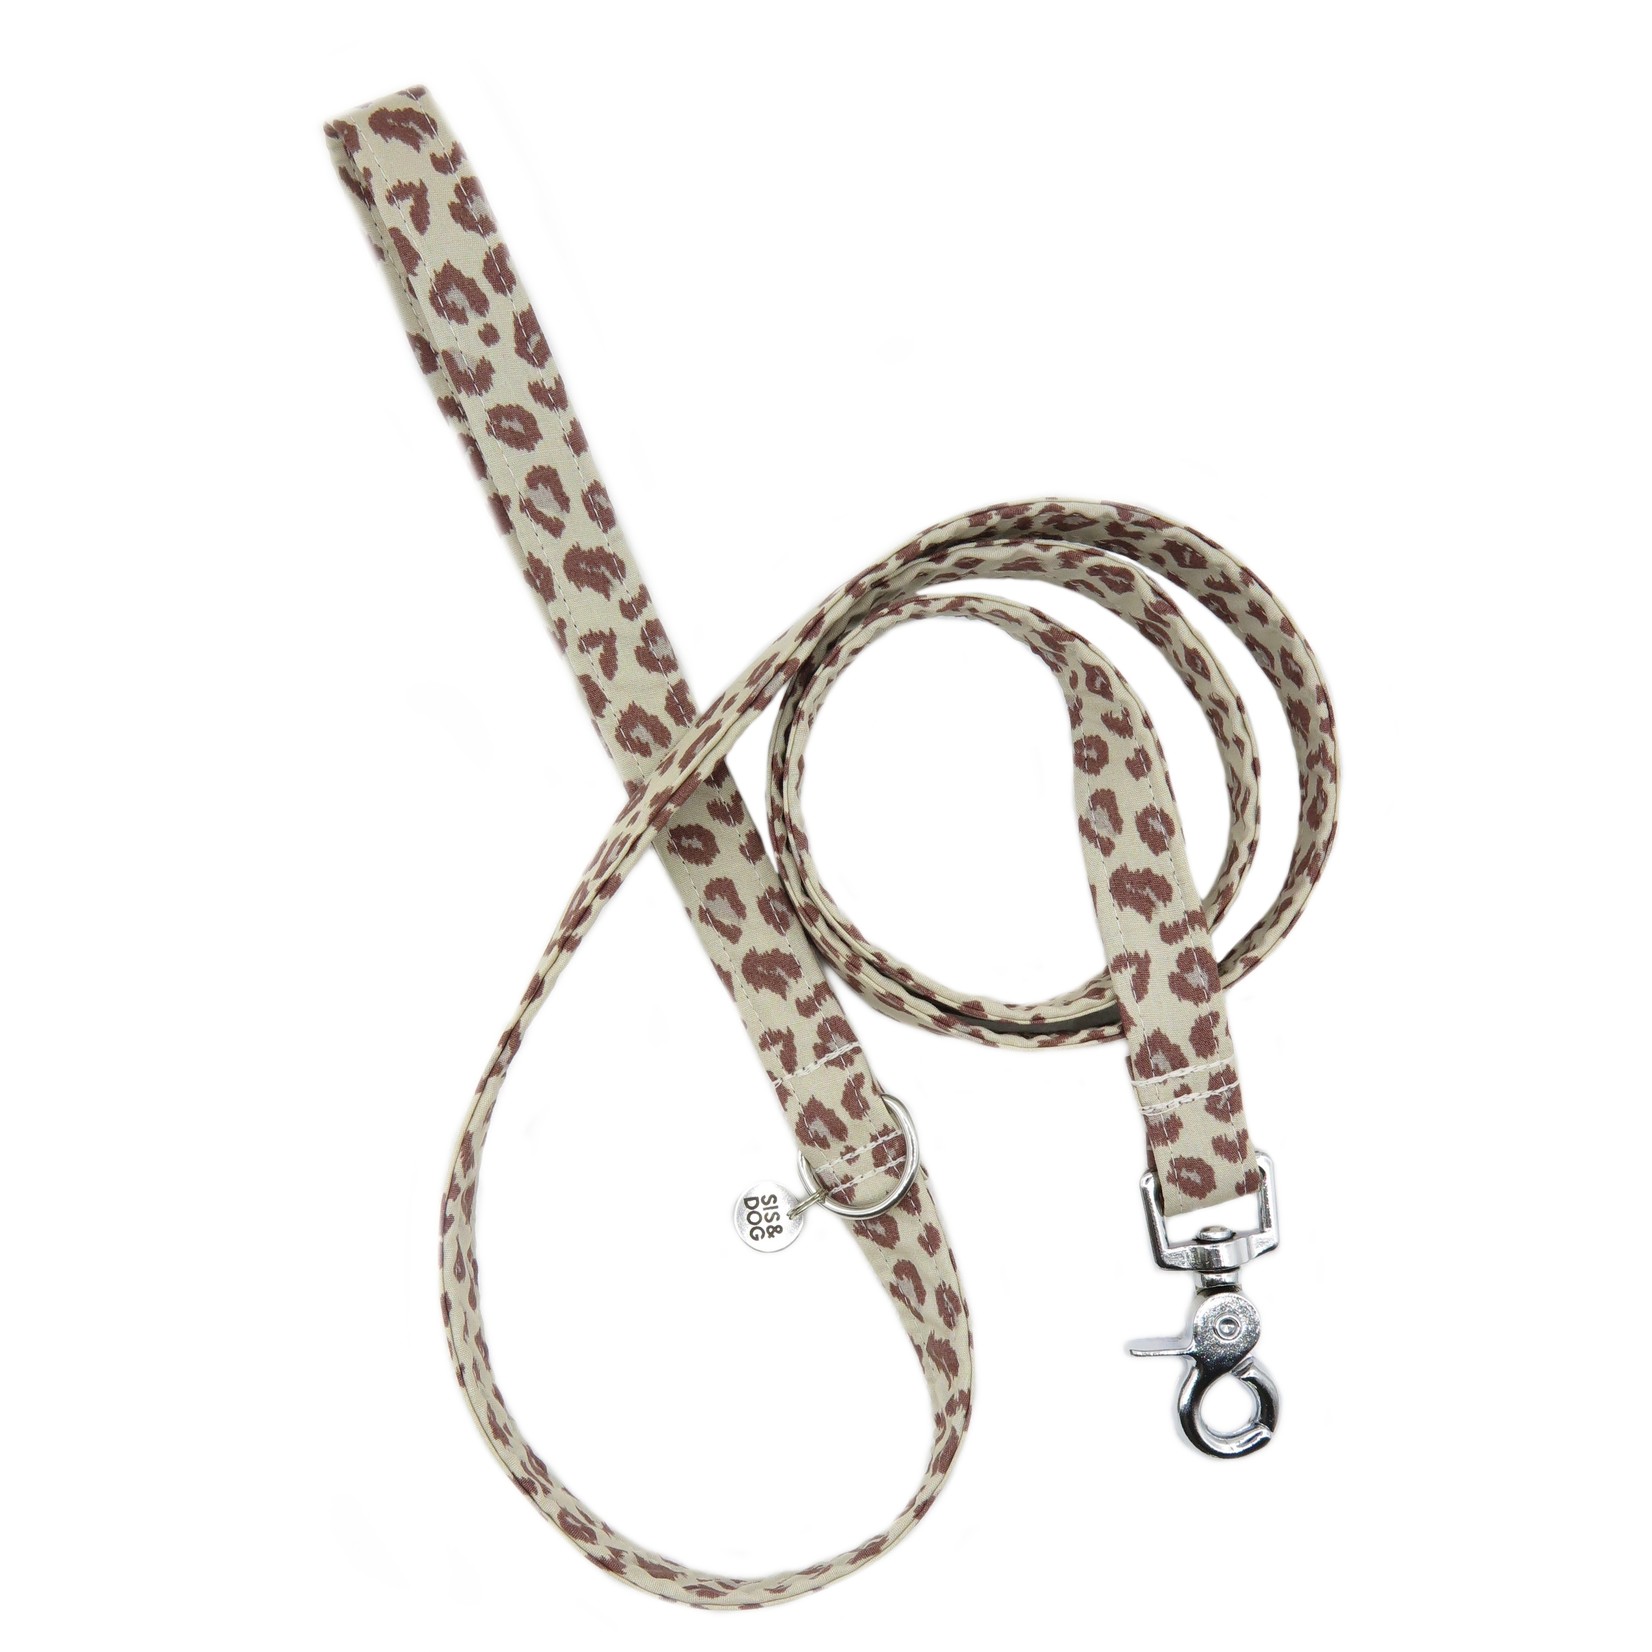 Panther leash